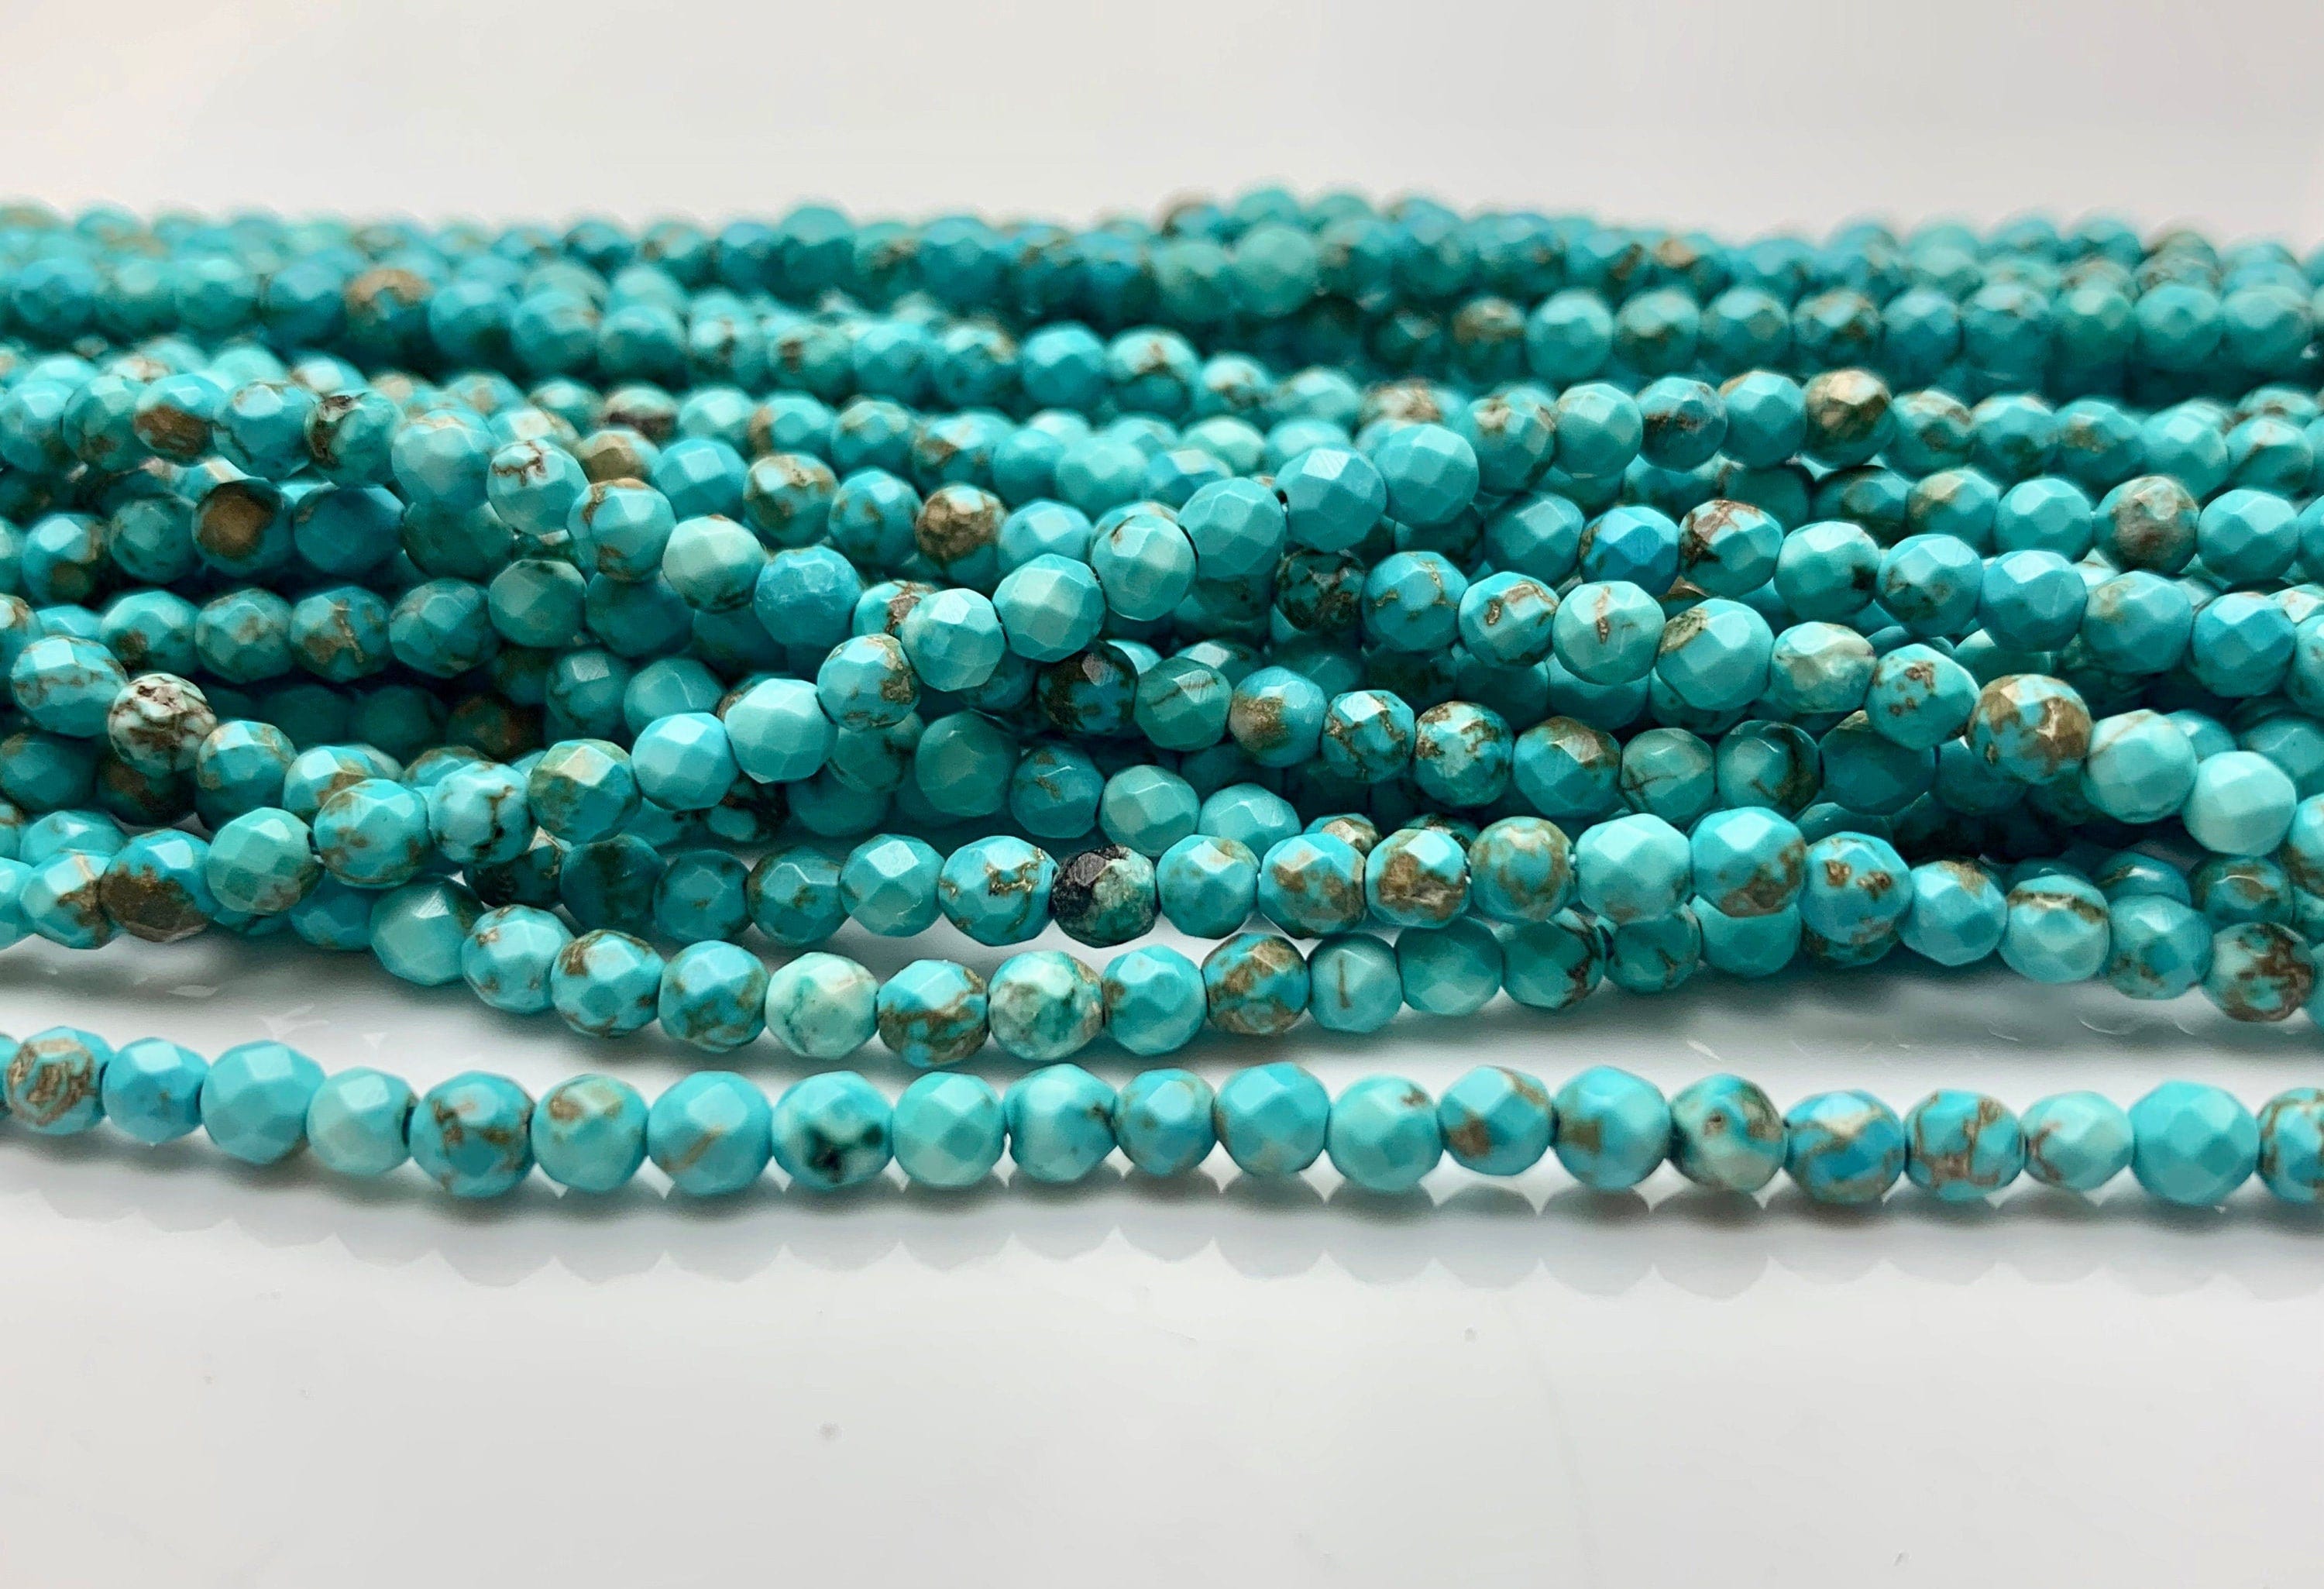  Song Xi 130pcs Faceted African Turquoise Stone Beads 3x2mm  Briolette Stone Beads Loose Natural Stone Beads for Jewelry Making : Arts,  Crafts & Sewing